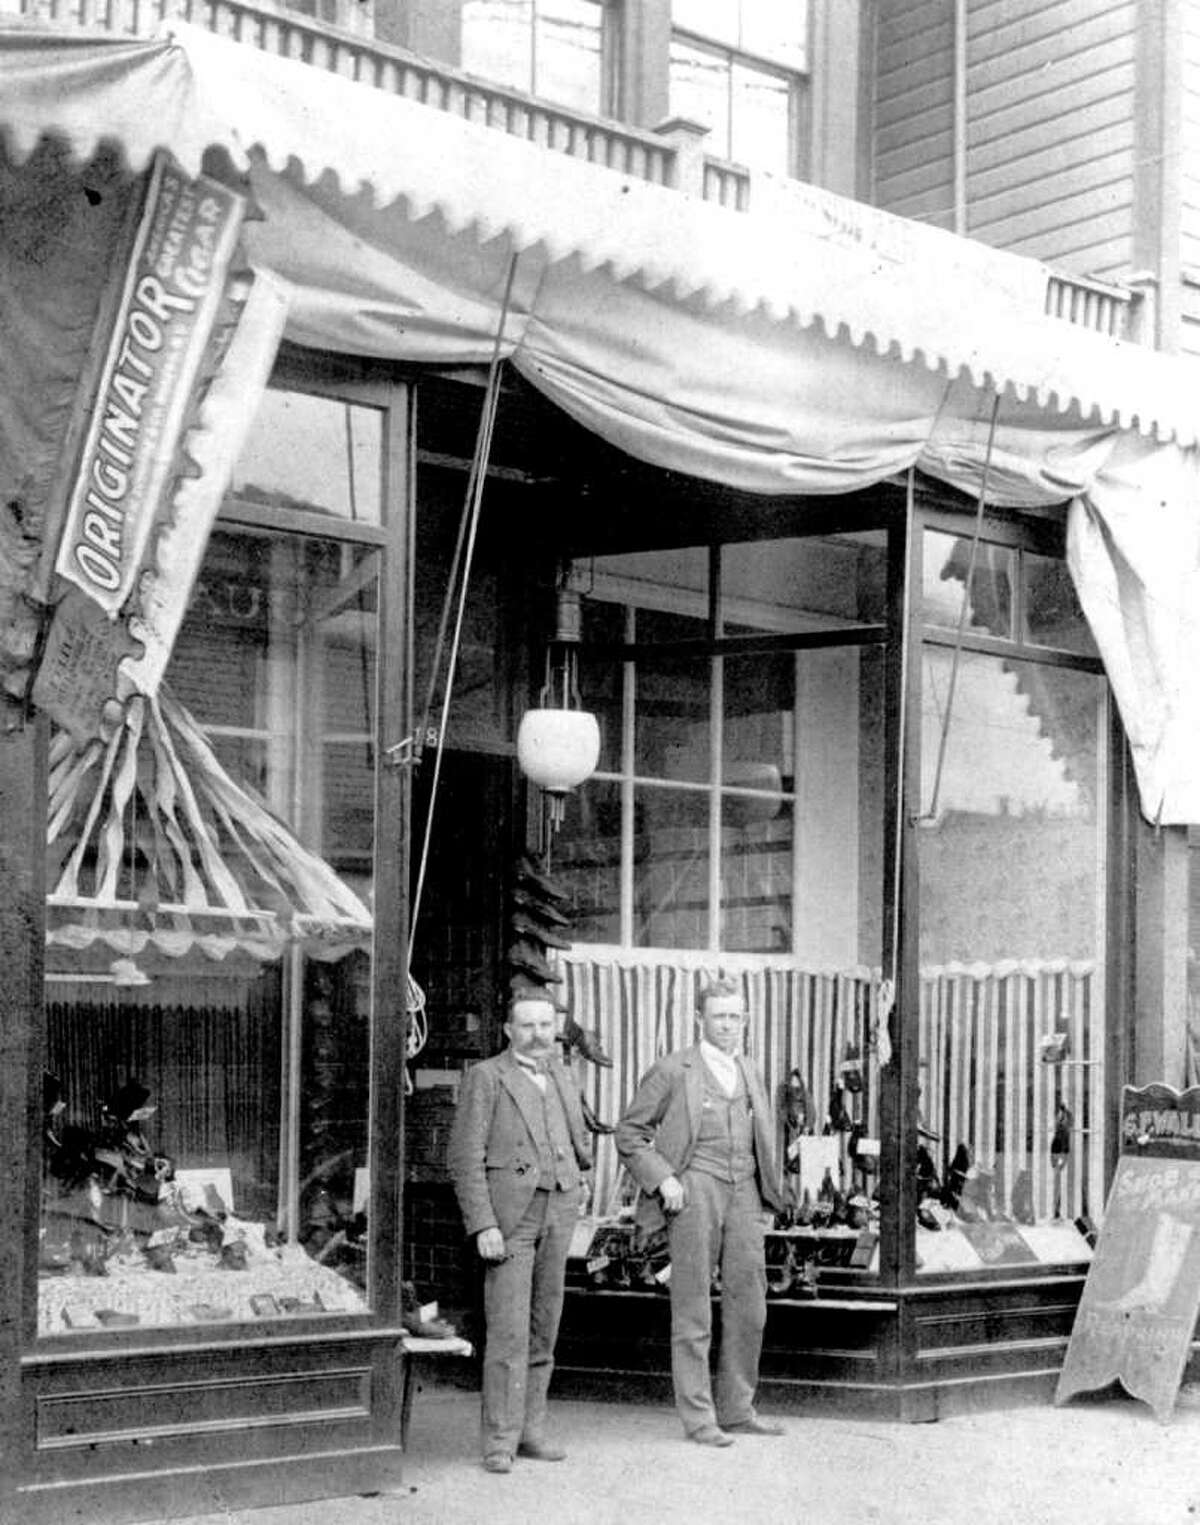 Carl Wallin, left, and John W. Nordstrom at their store near Fourth Avenue and Pike Street, 1901.